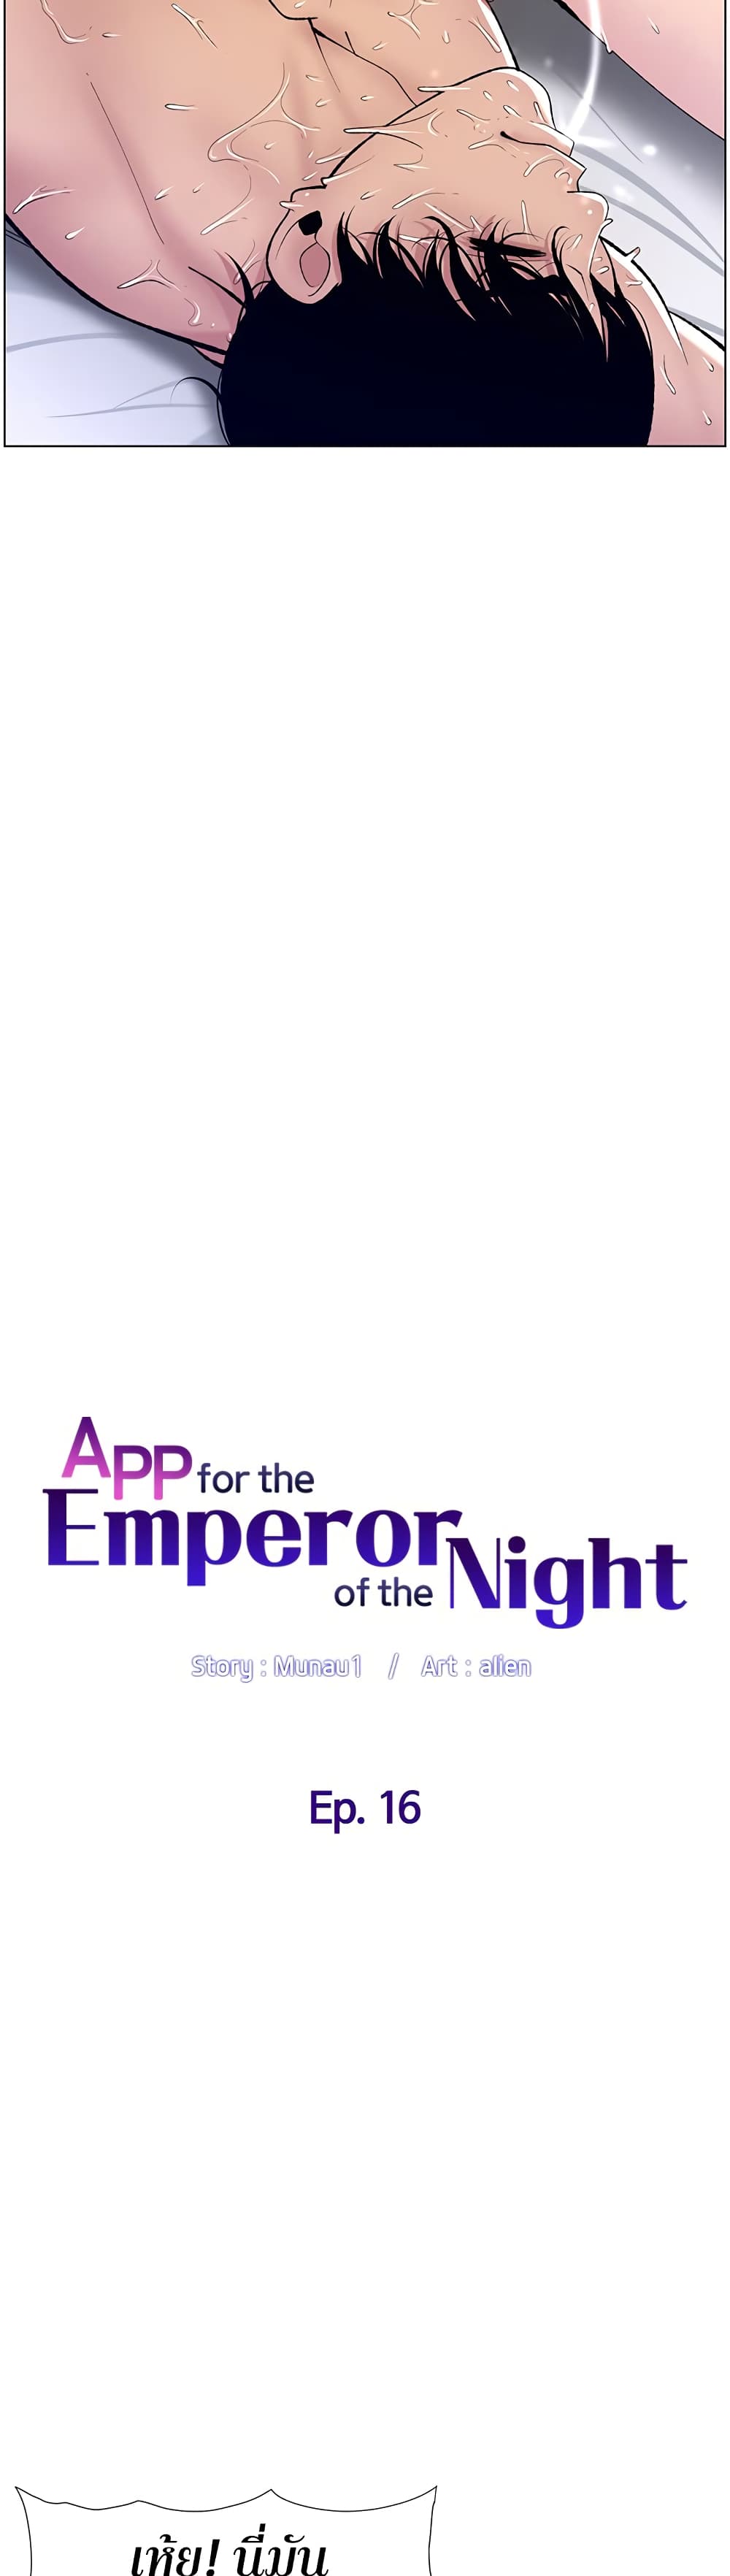 APP for the Emperor of the Night 16-16